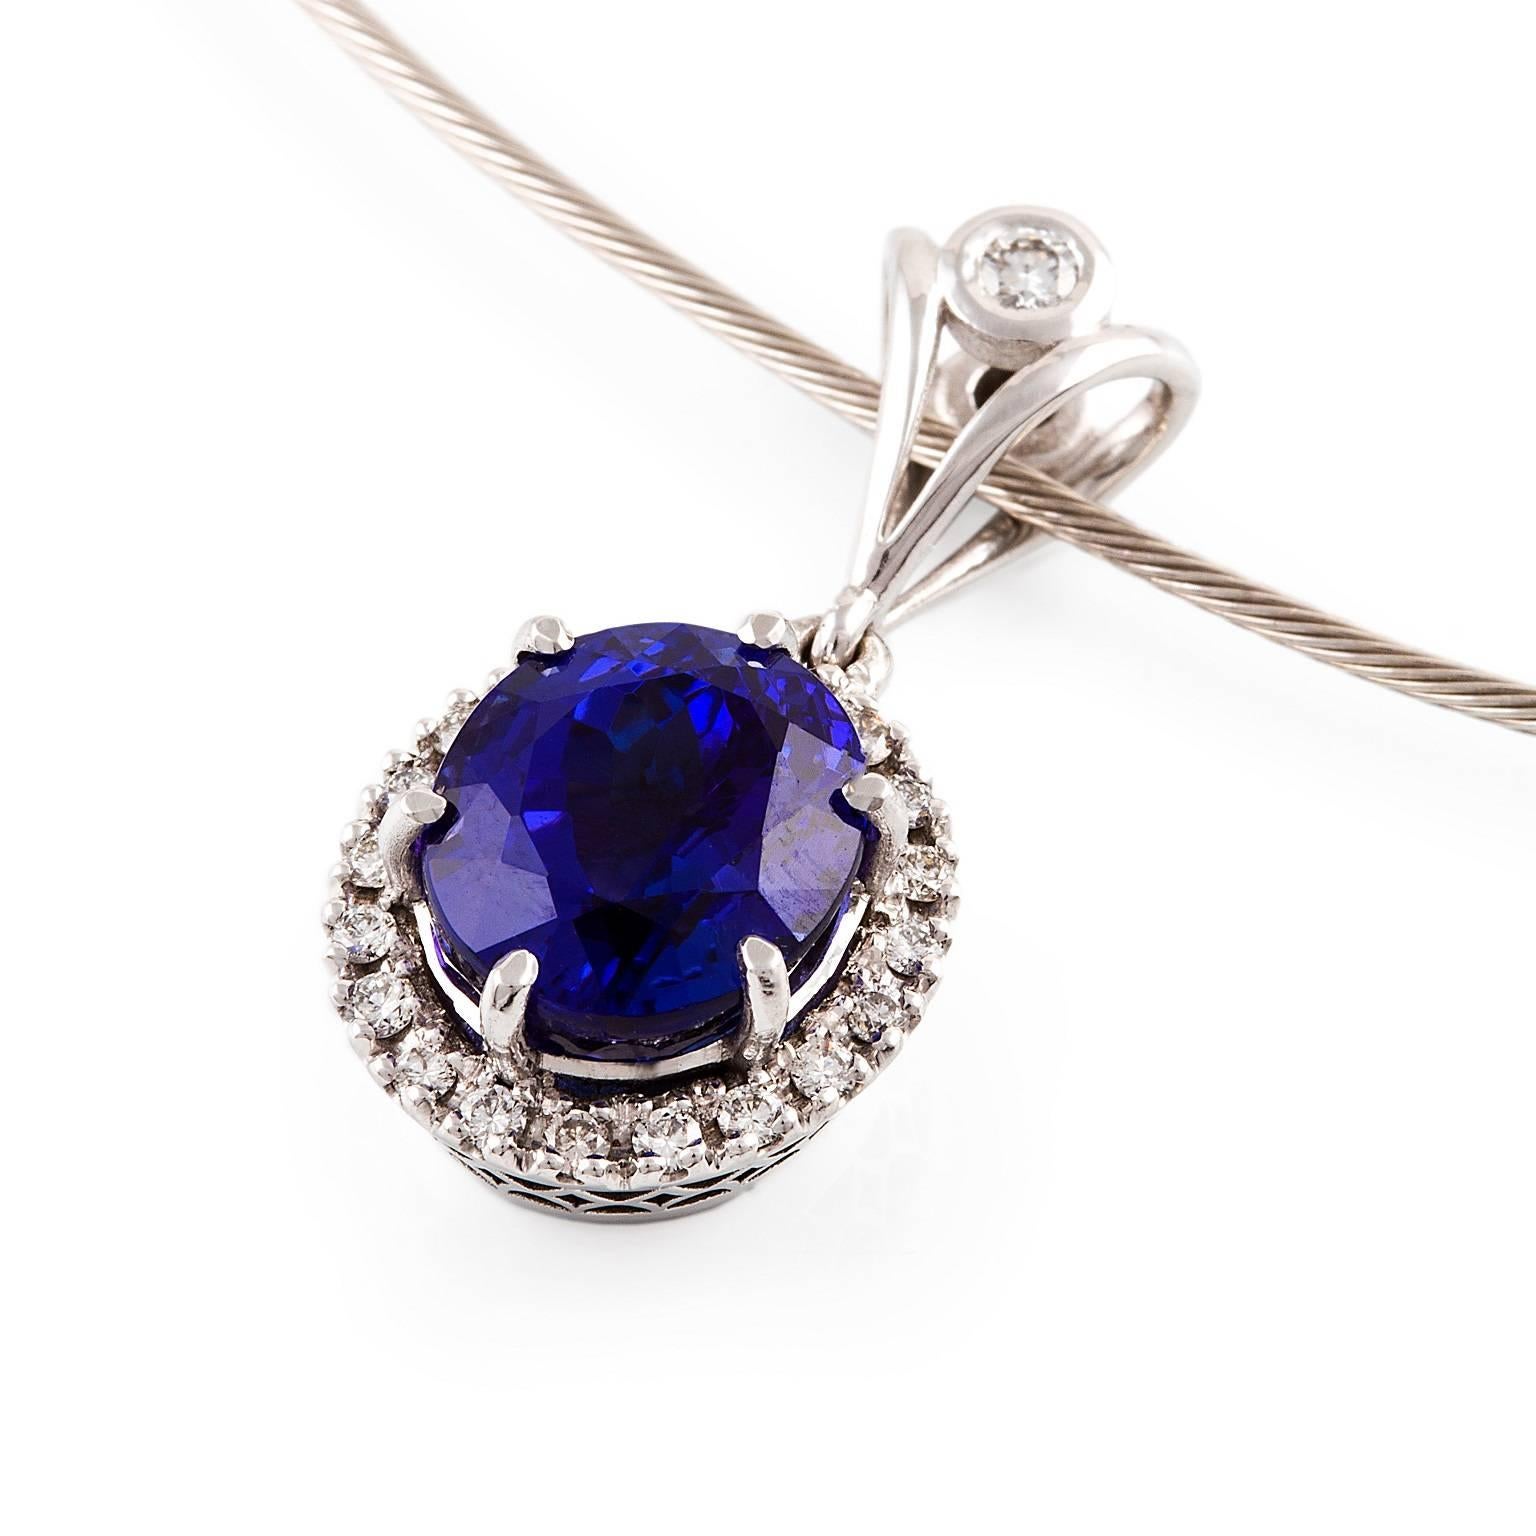 Certified 6.30 Carat Oval Tanzanite and Diamond Necklace in 18 Carat White Gold For Sale 1